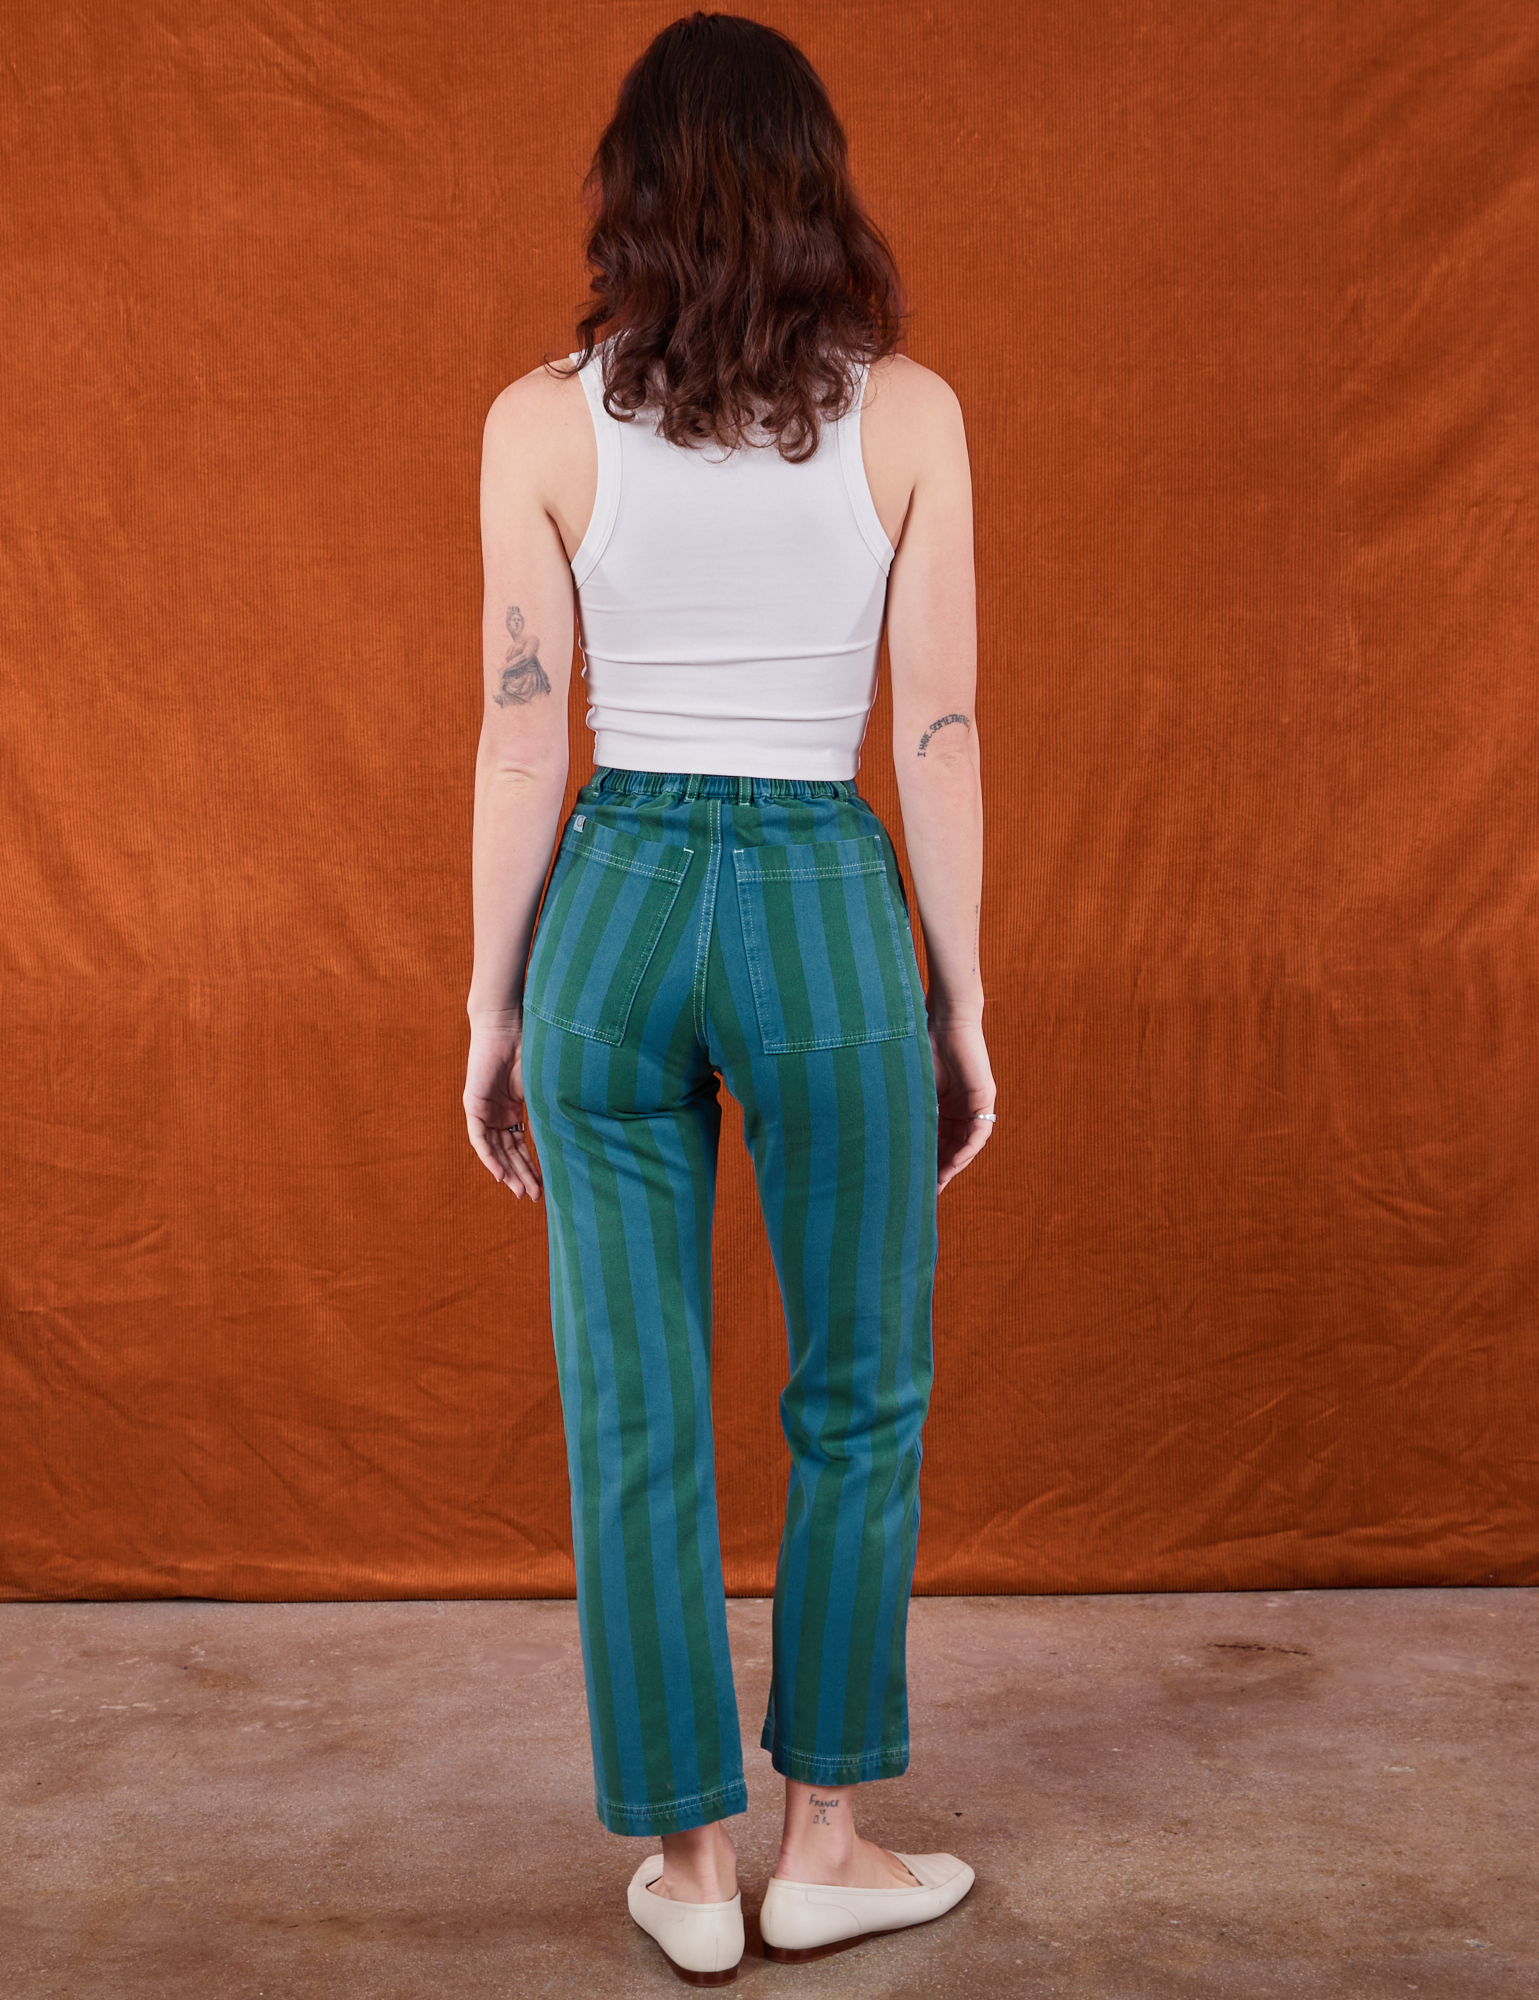 Back view of Overdye Stripe Work Pants in Blue/Green and vintage off-white Cropped Tank Top on Alex